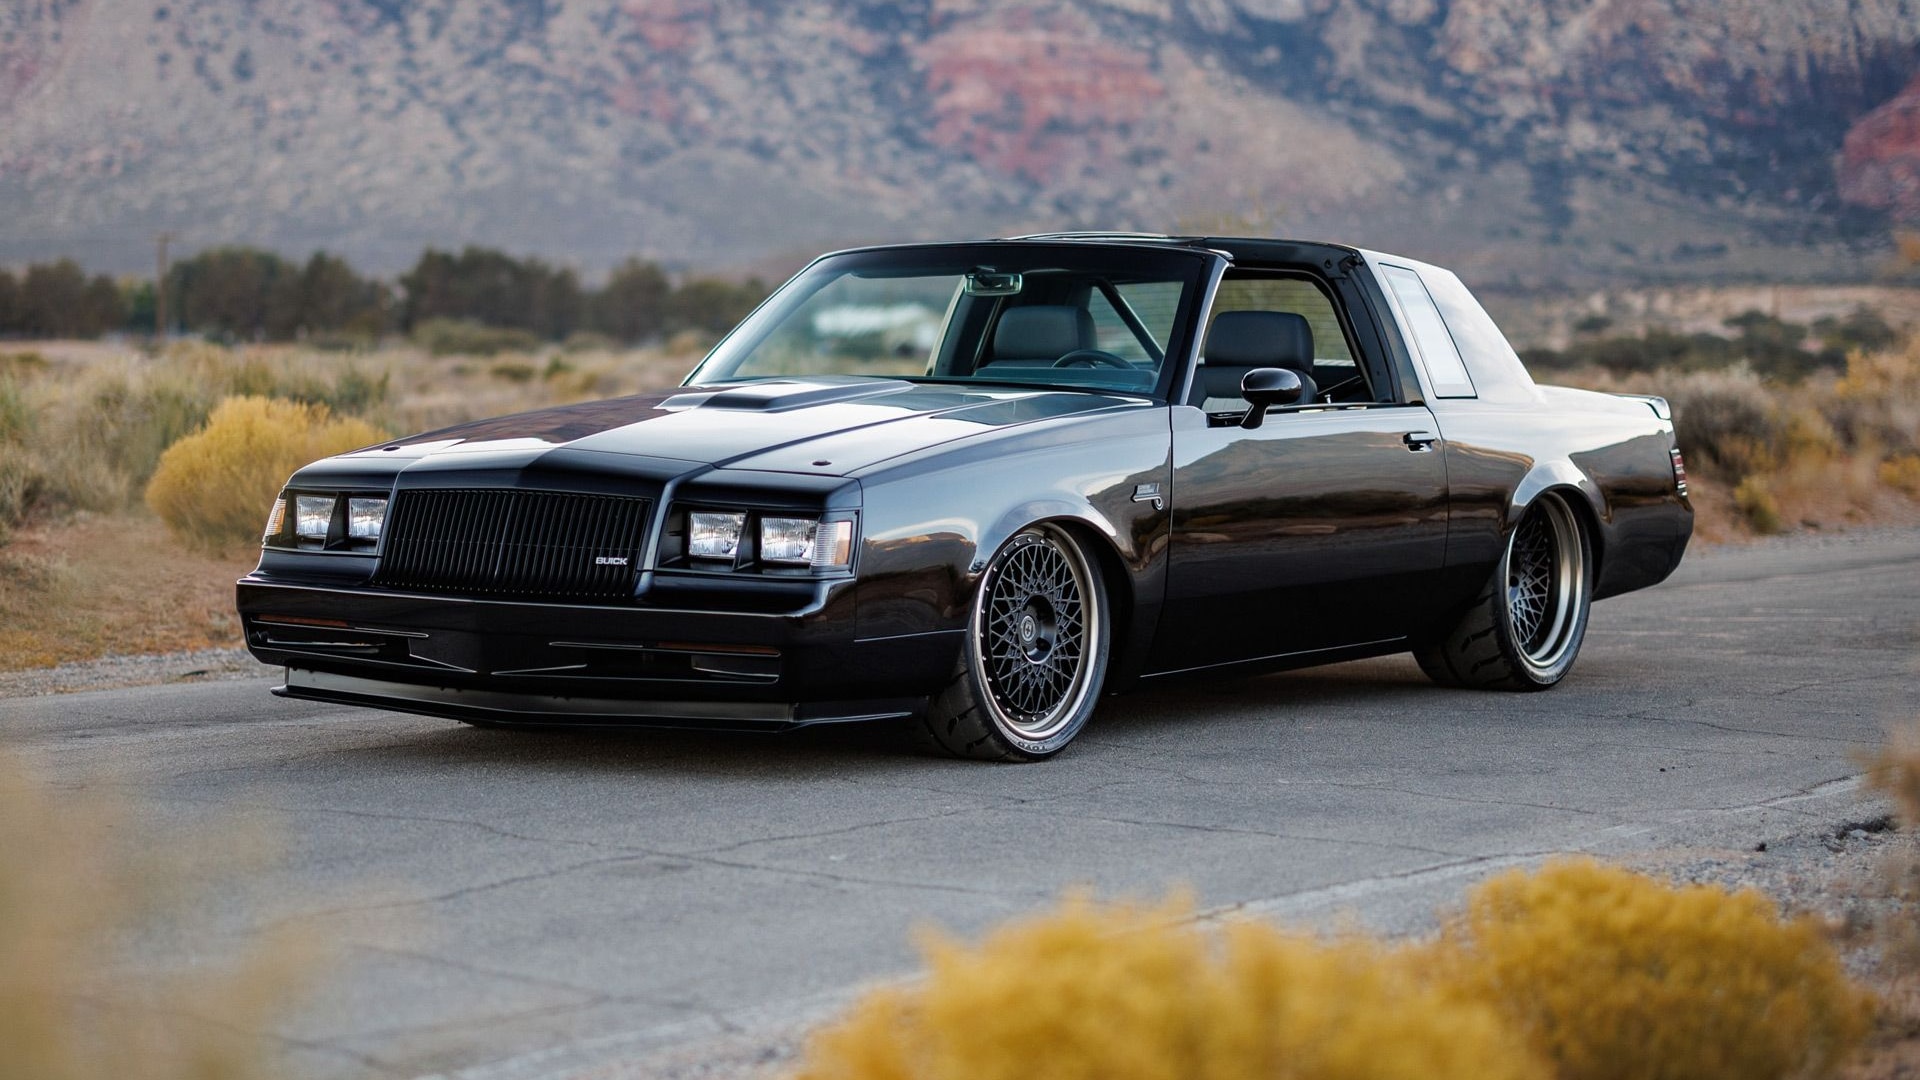 Kevin Hart’s 1987 Buick Grand National by Salvaggio Design